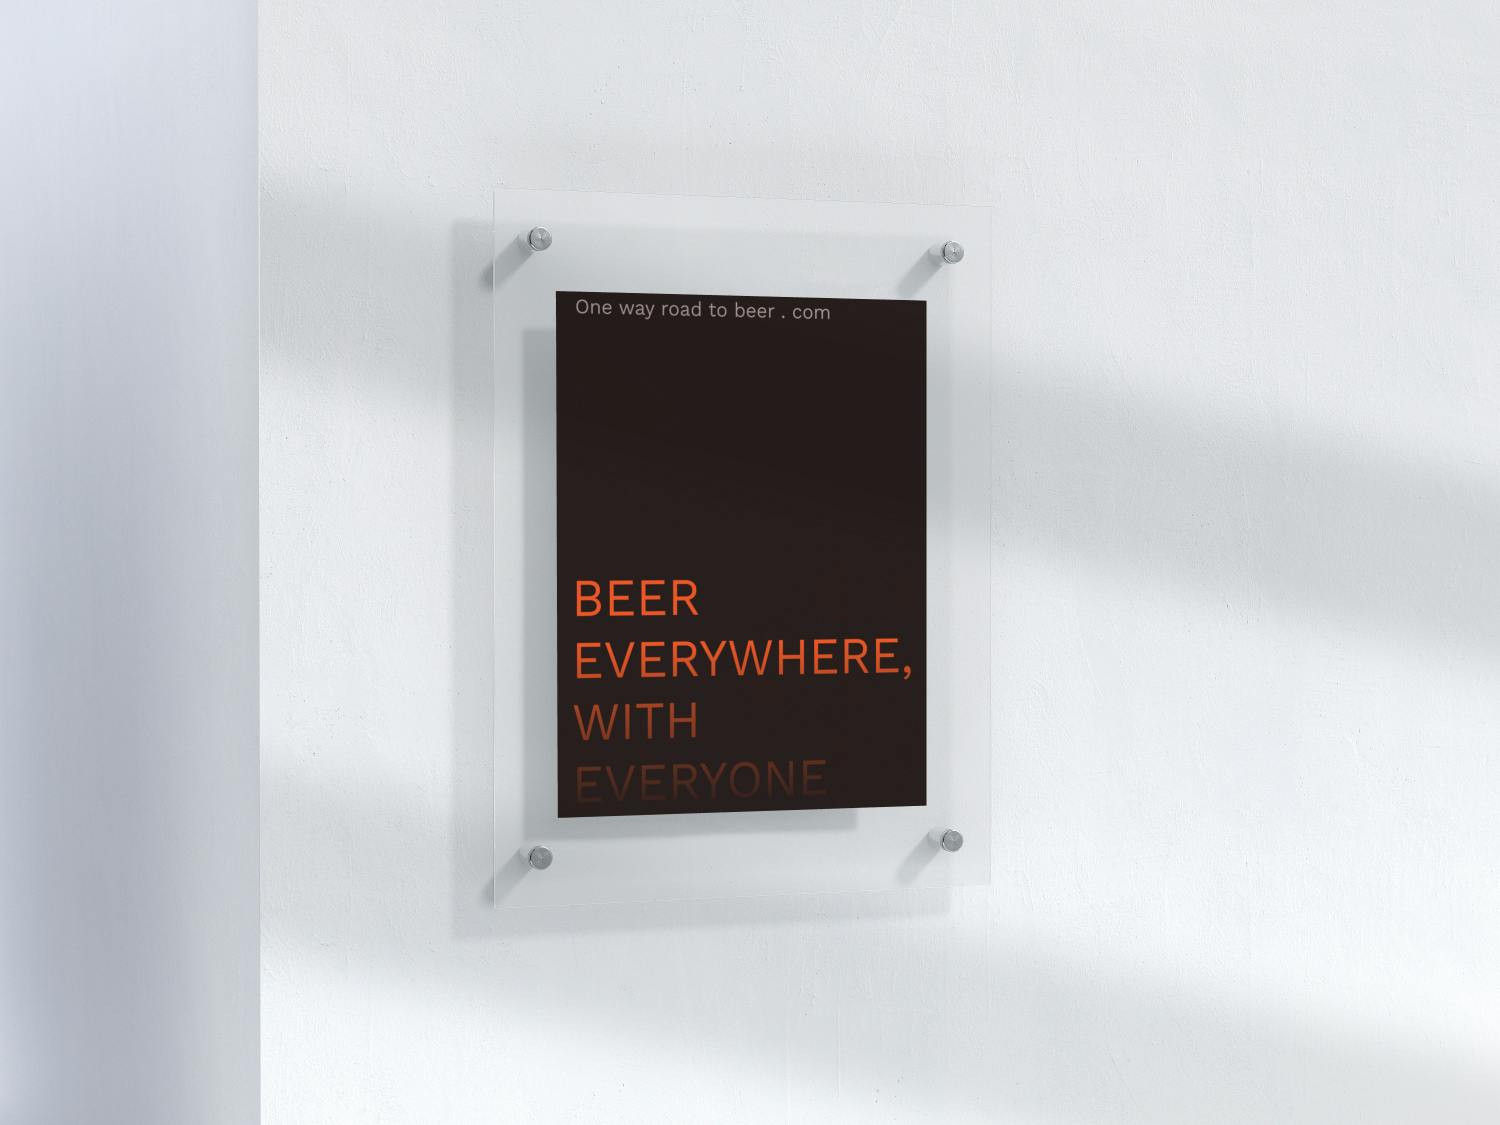 A photograph showing a mock up of a One way road to beer posters - A dark background with orange text - BEER EVERYWHERE WITH EVERYONE.